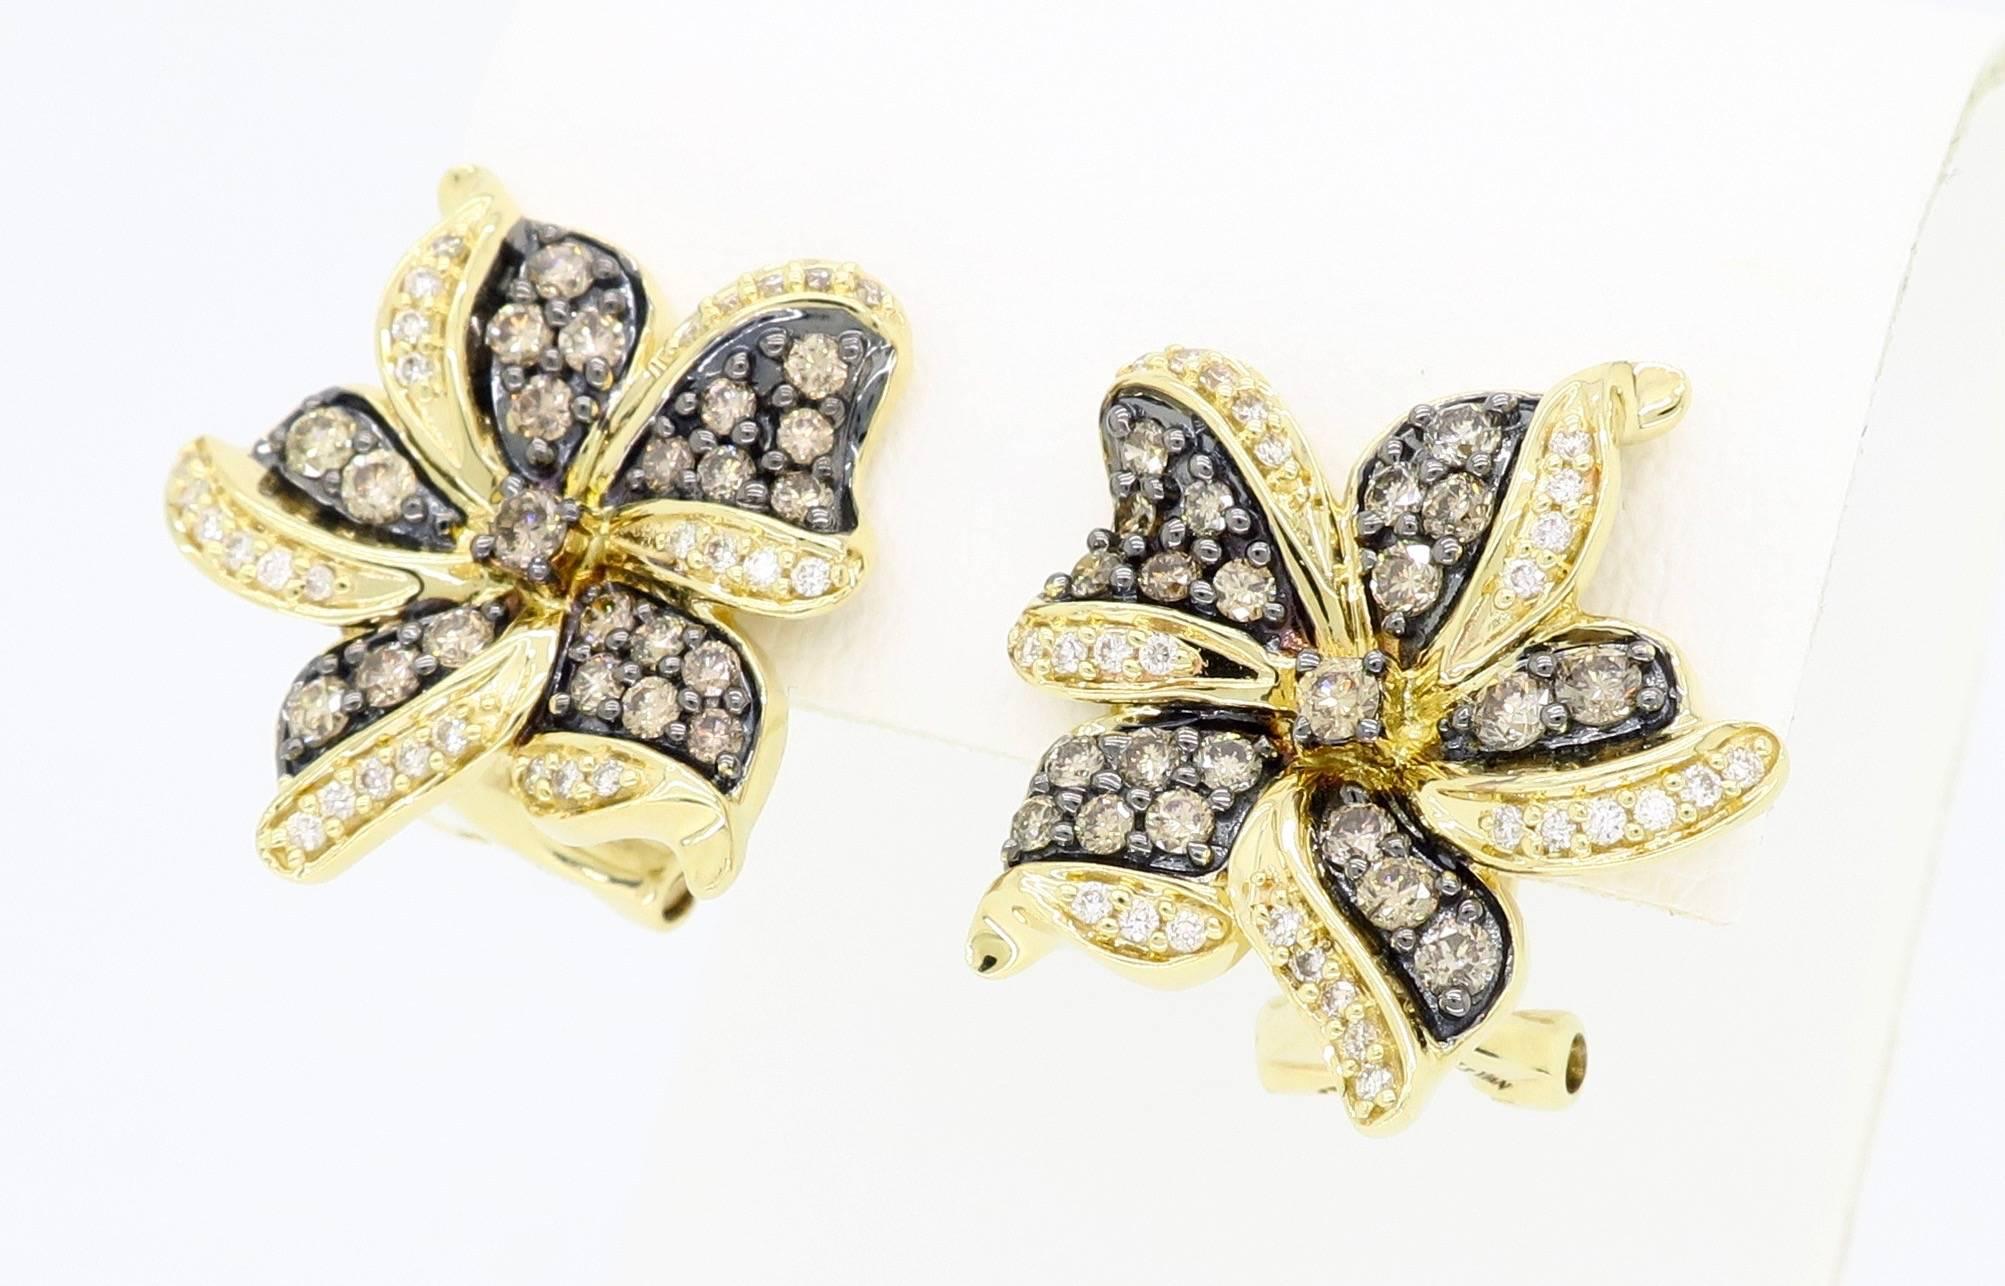 These beautiful flower shaped earrings designed by LeVian feature approximately 1.50CTW of diamonds.

Designer: LeVian
Gemstone: Diamond
Diamond Carat Weight: Approximately 1.50CTW
Diamond Cut: 98 Round Brilliant 
Color: 44 Chocolate Color, 54